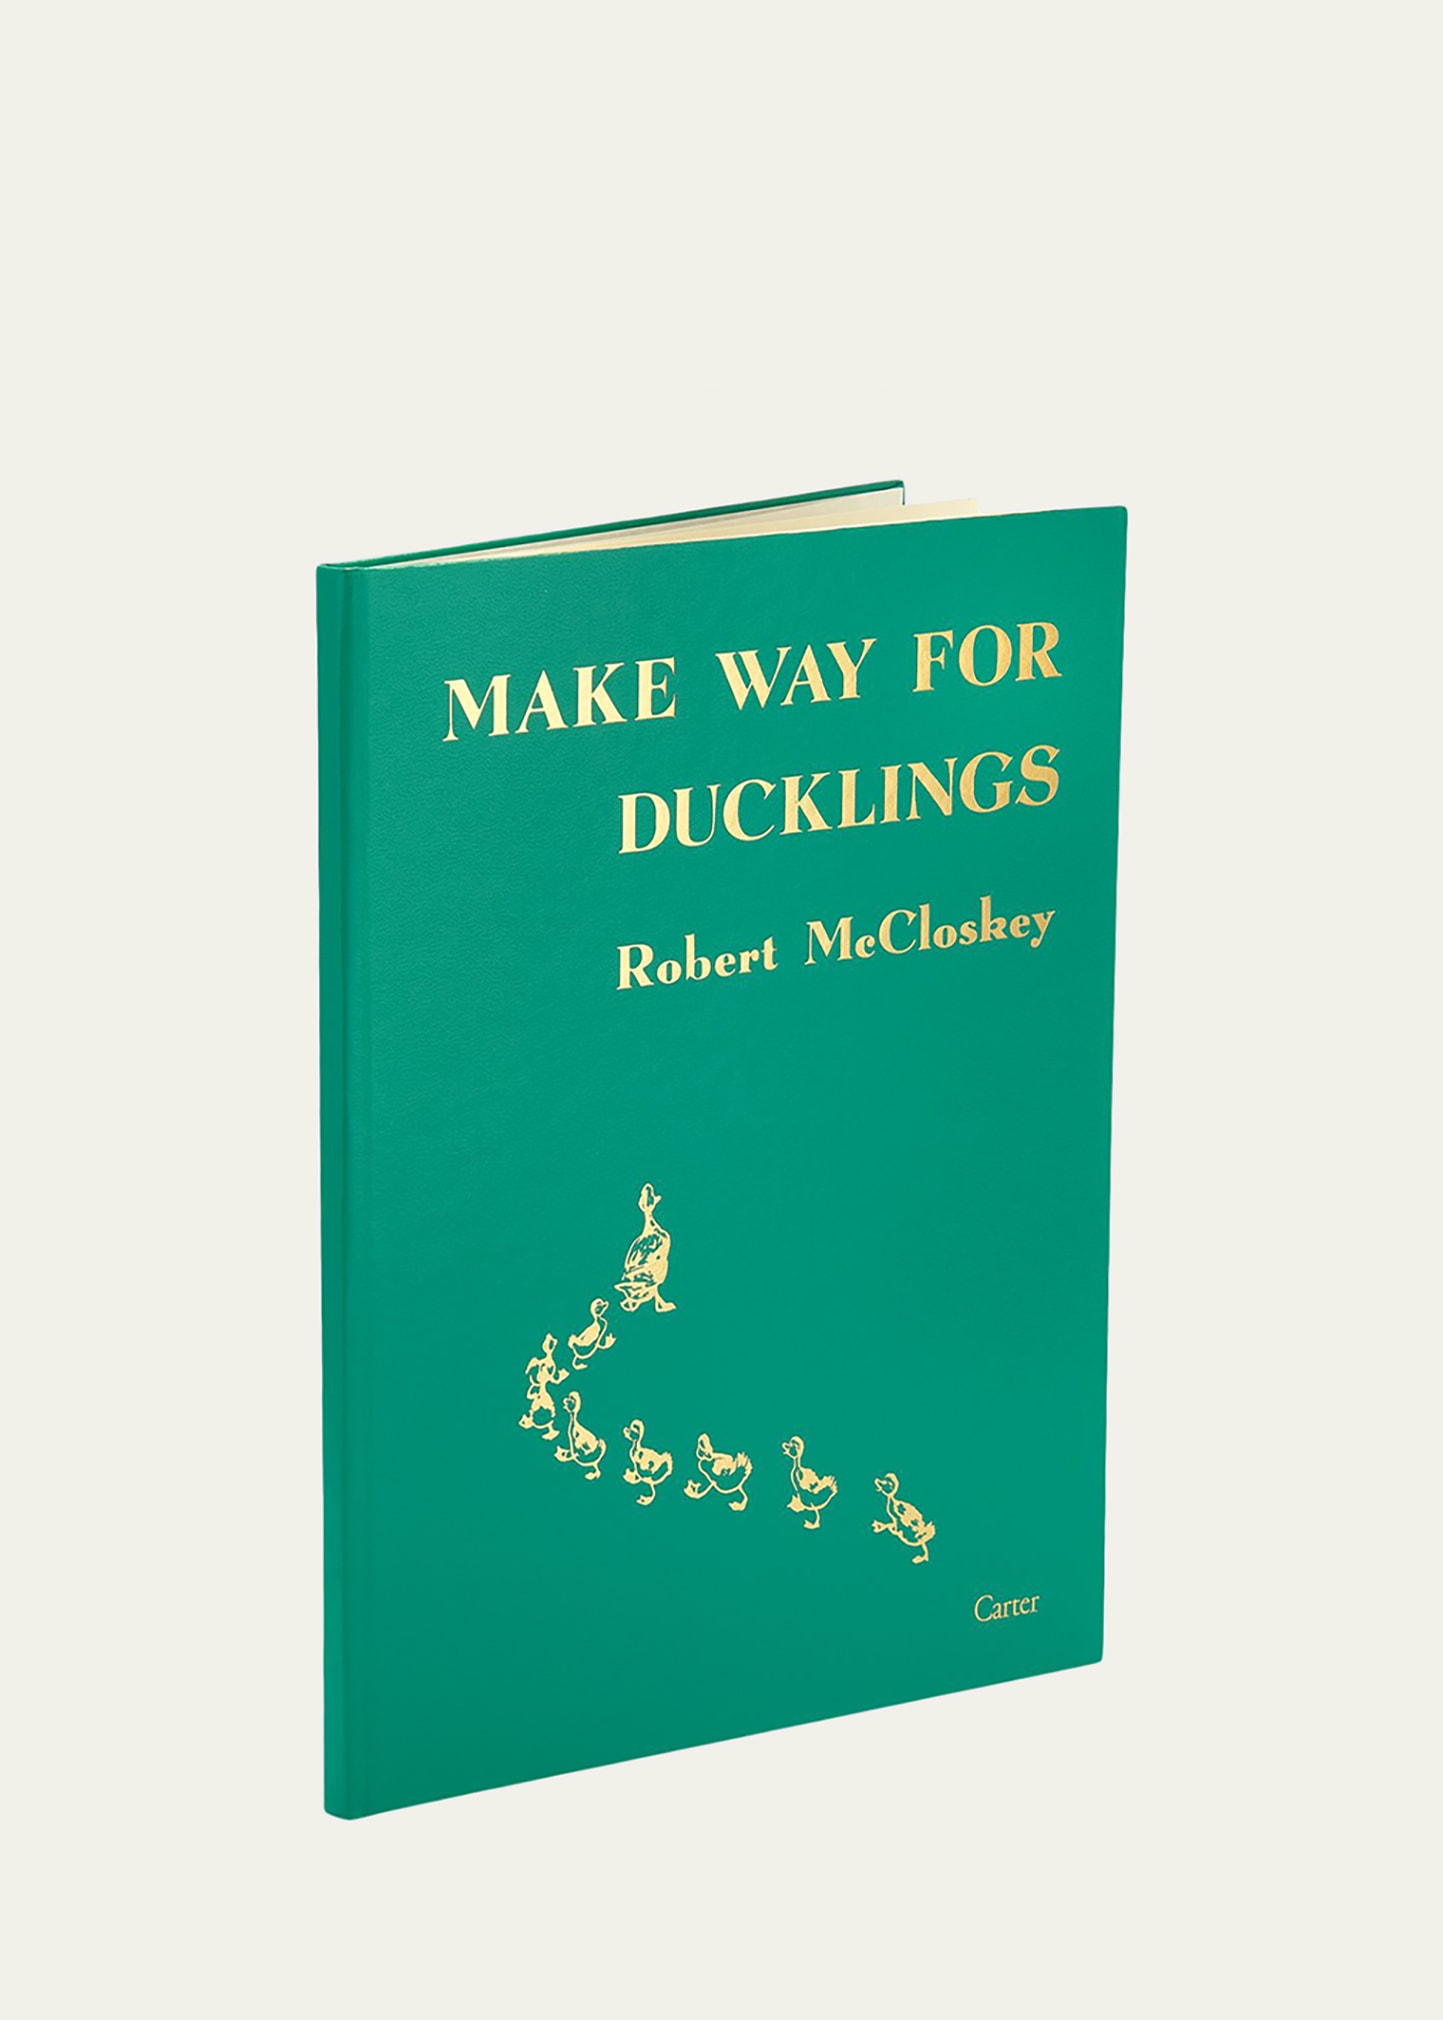 Personalized "Make Way For Ducklings" Children's Book by Robert McCloskey